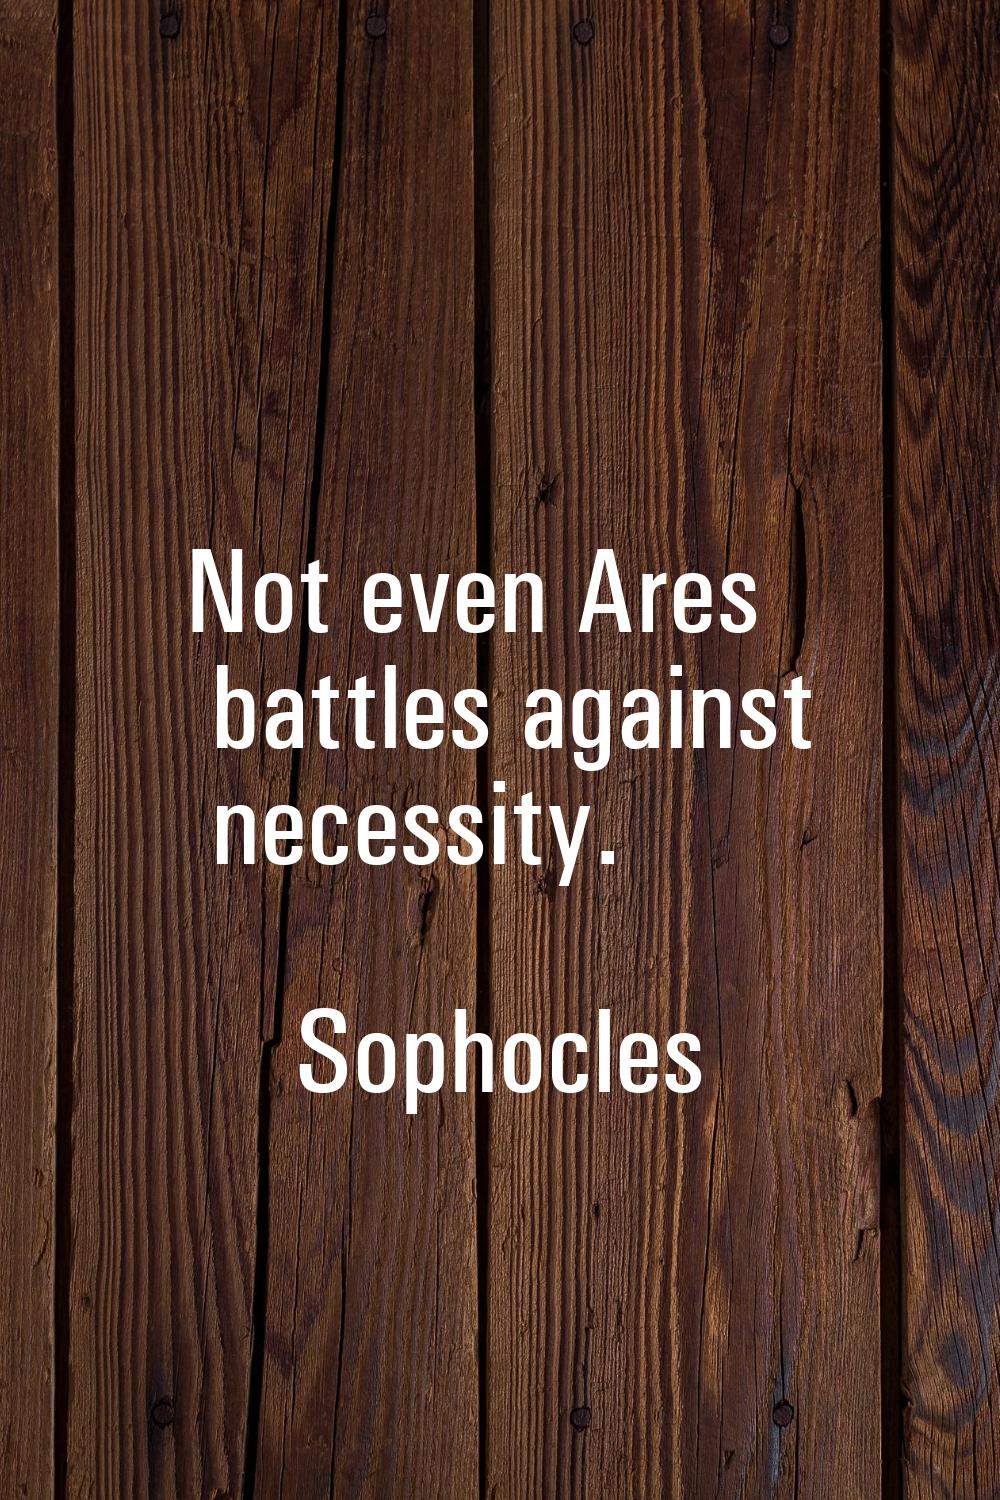 Not even Ares battles against necessity.